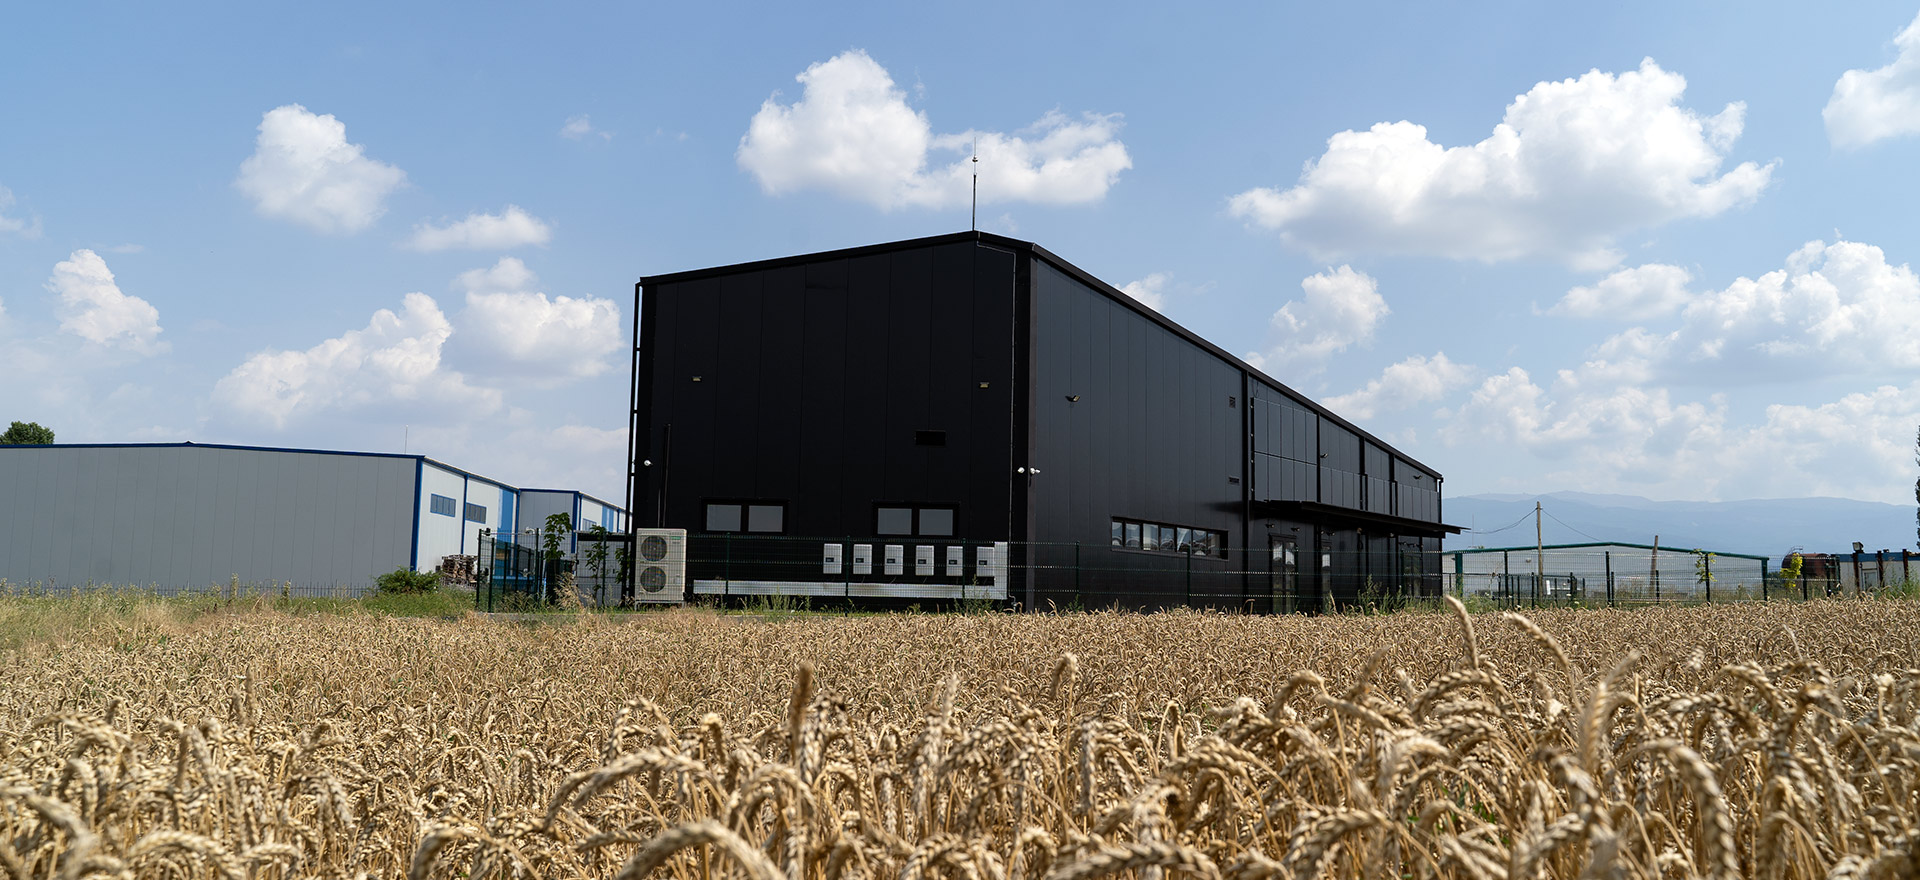 NatFood's production facility is powered by solar renewable energy